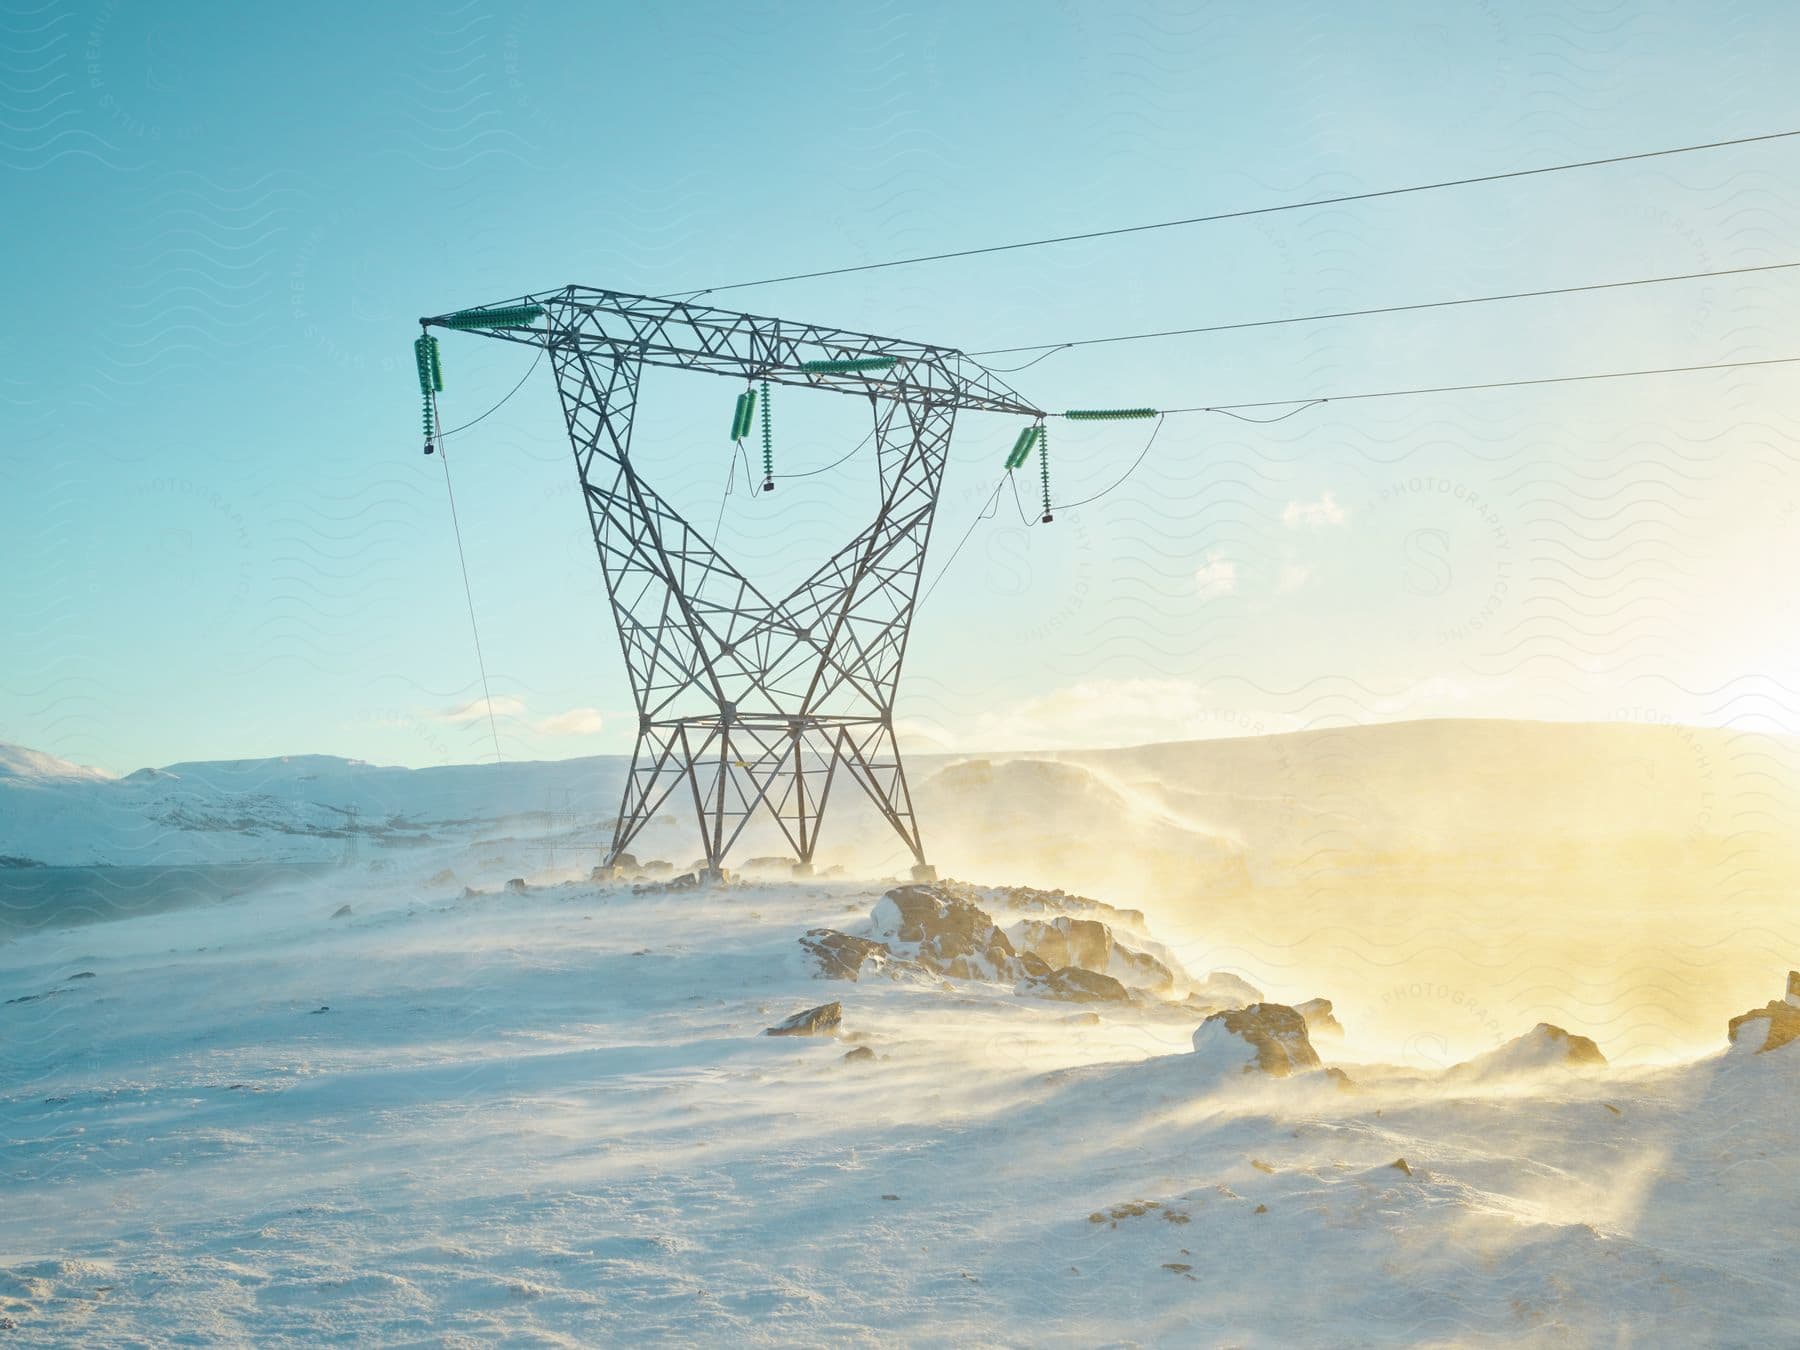 An electrical transmission tower in snowy mountains